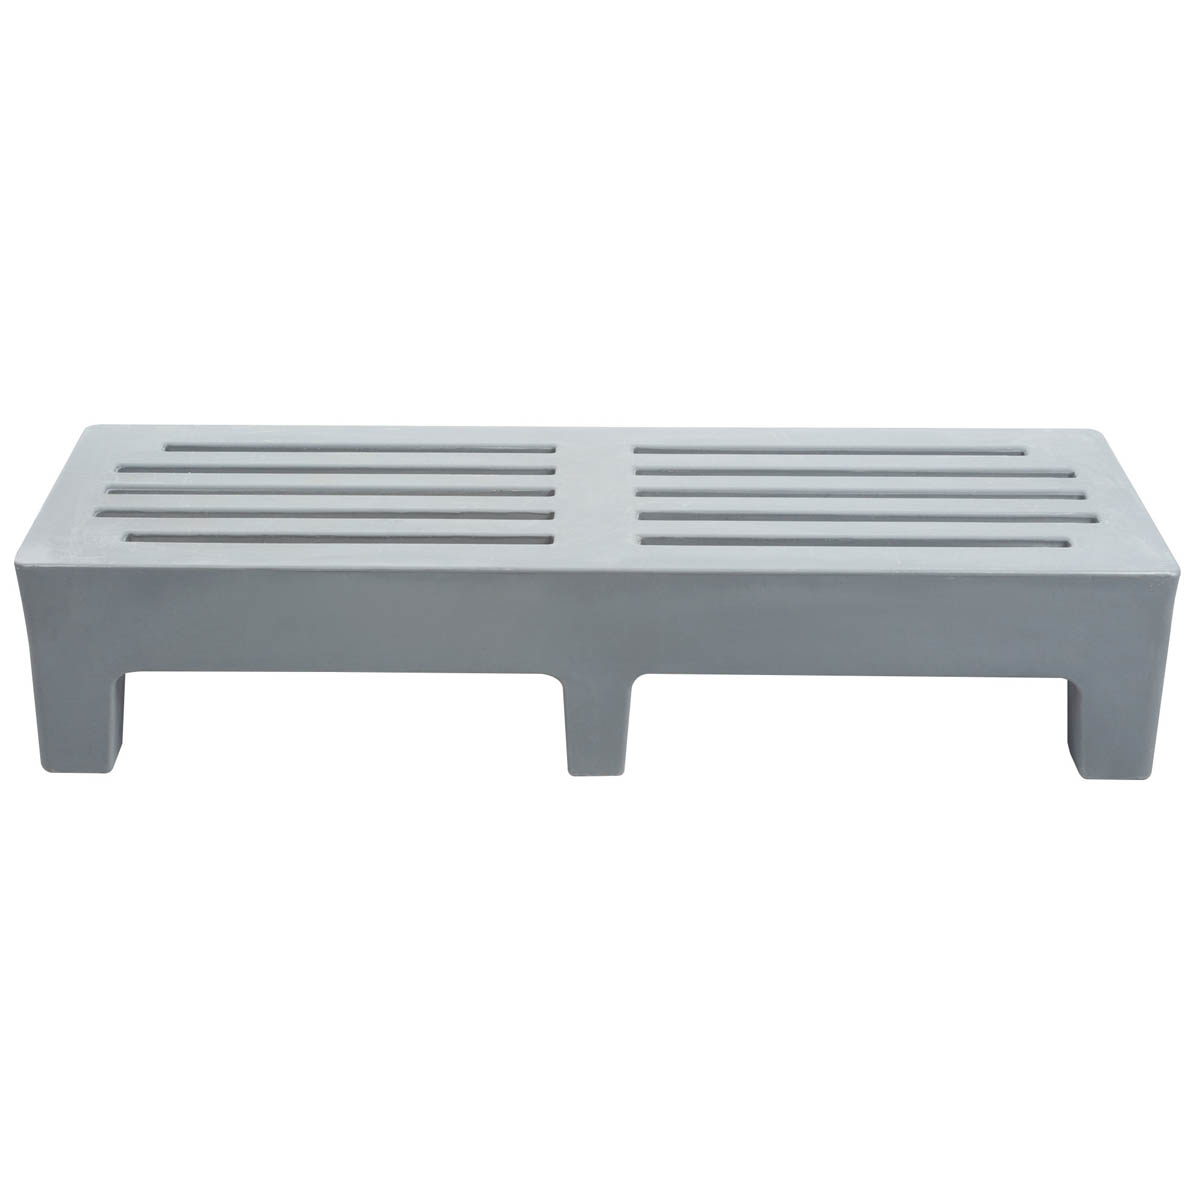 Winholt PLSQ-5-1222-GY 60″ Vented Dunnage Rack